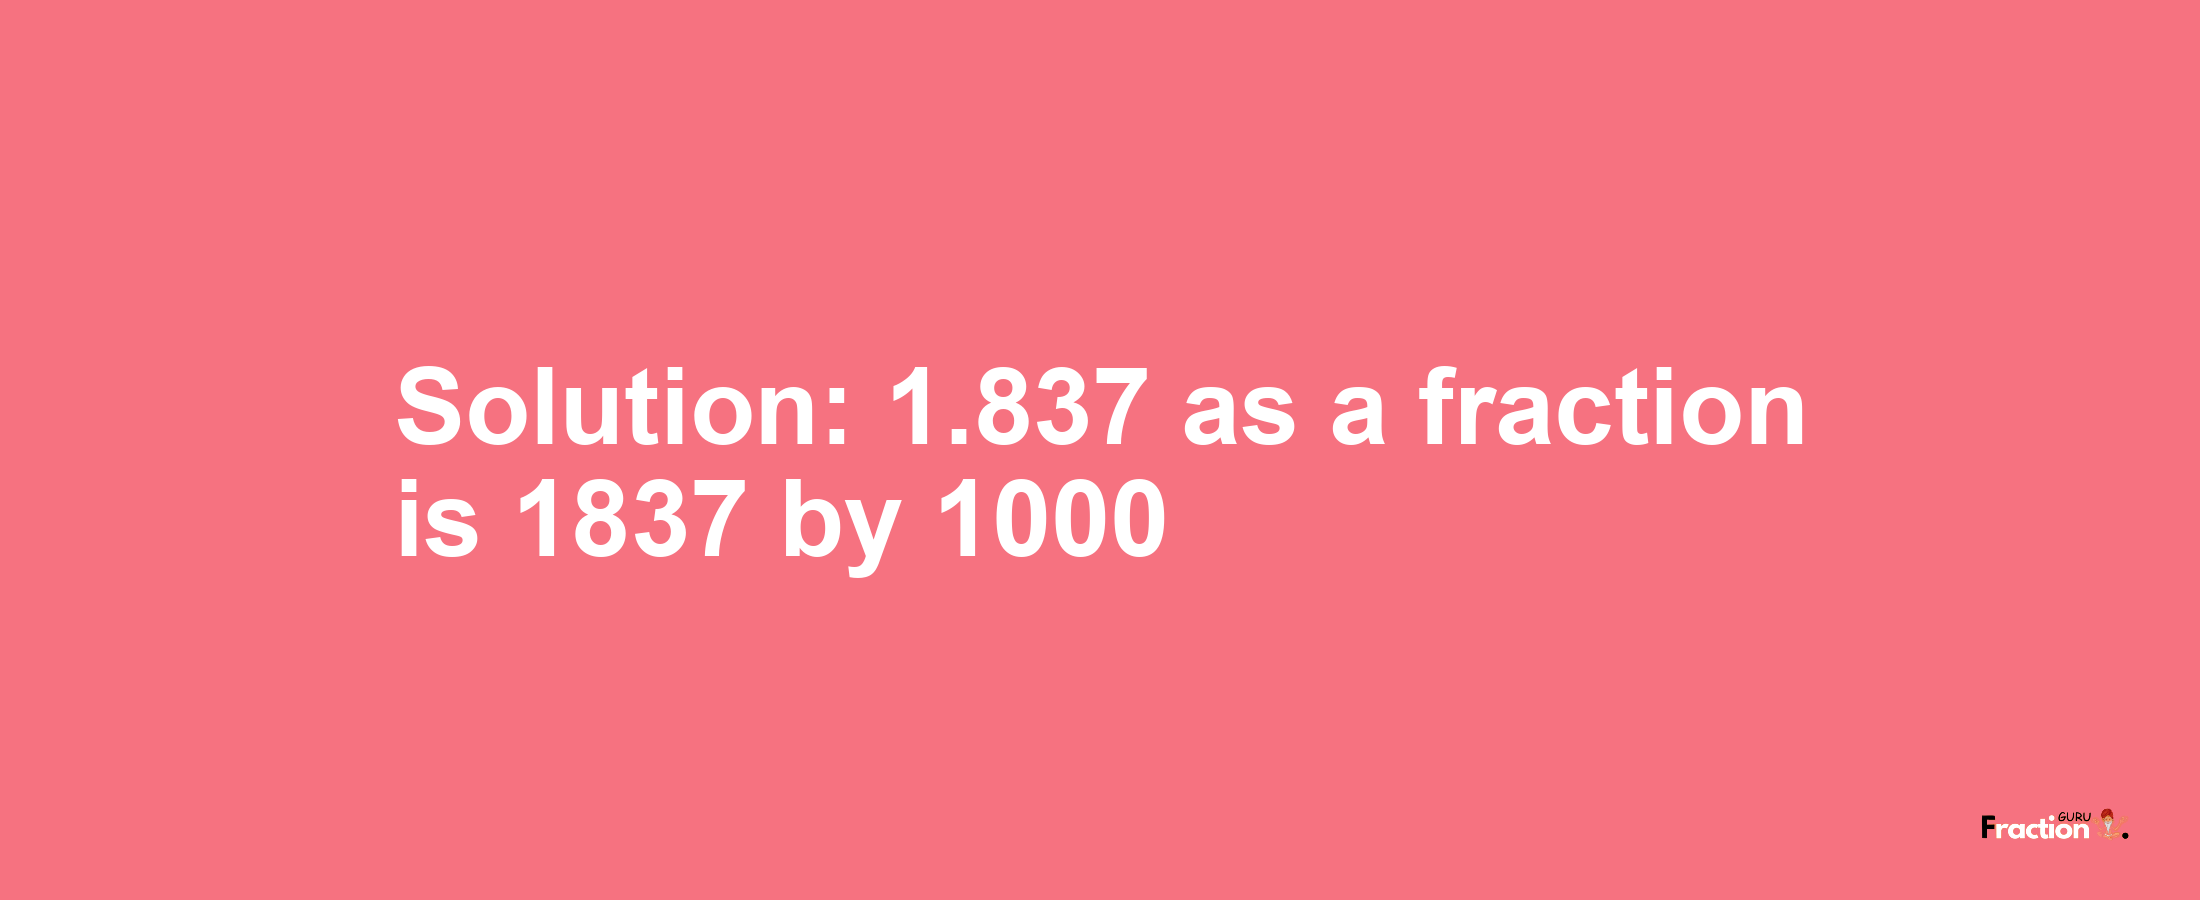 Solution:1.837 as a fraction is 1837/1000